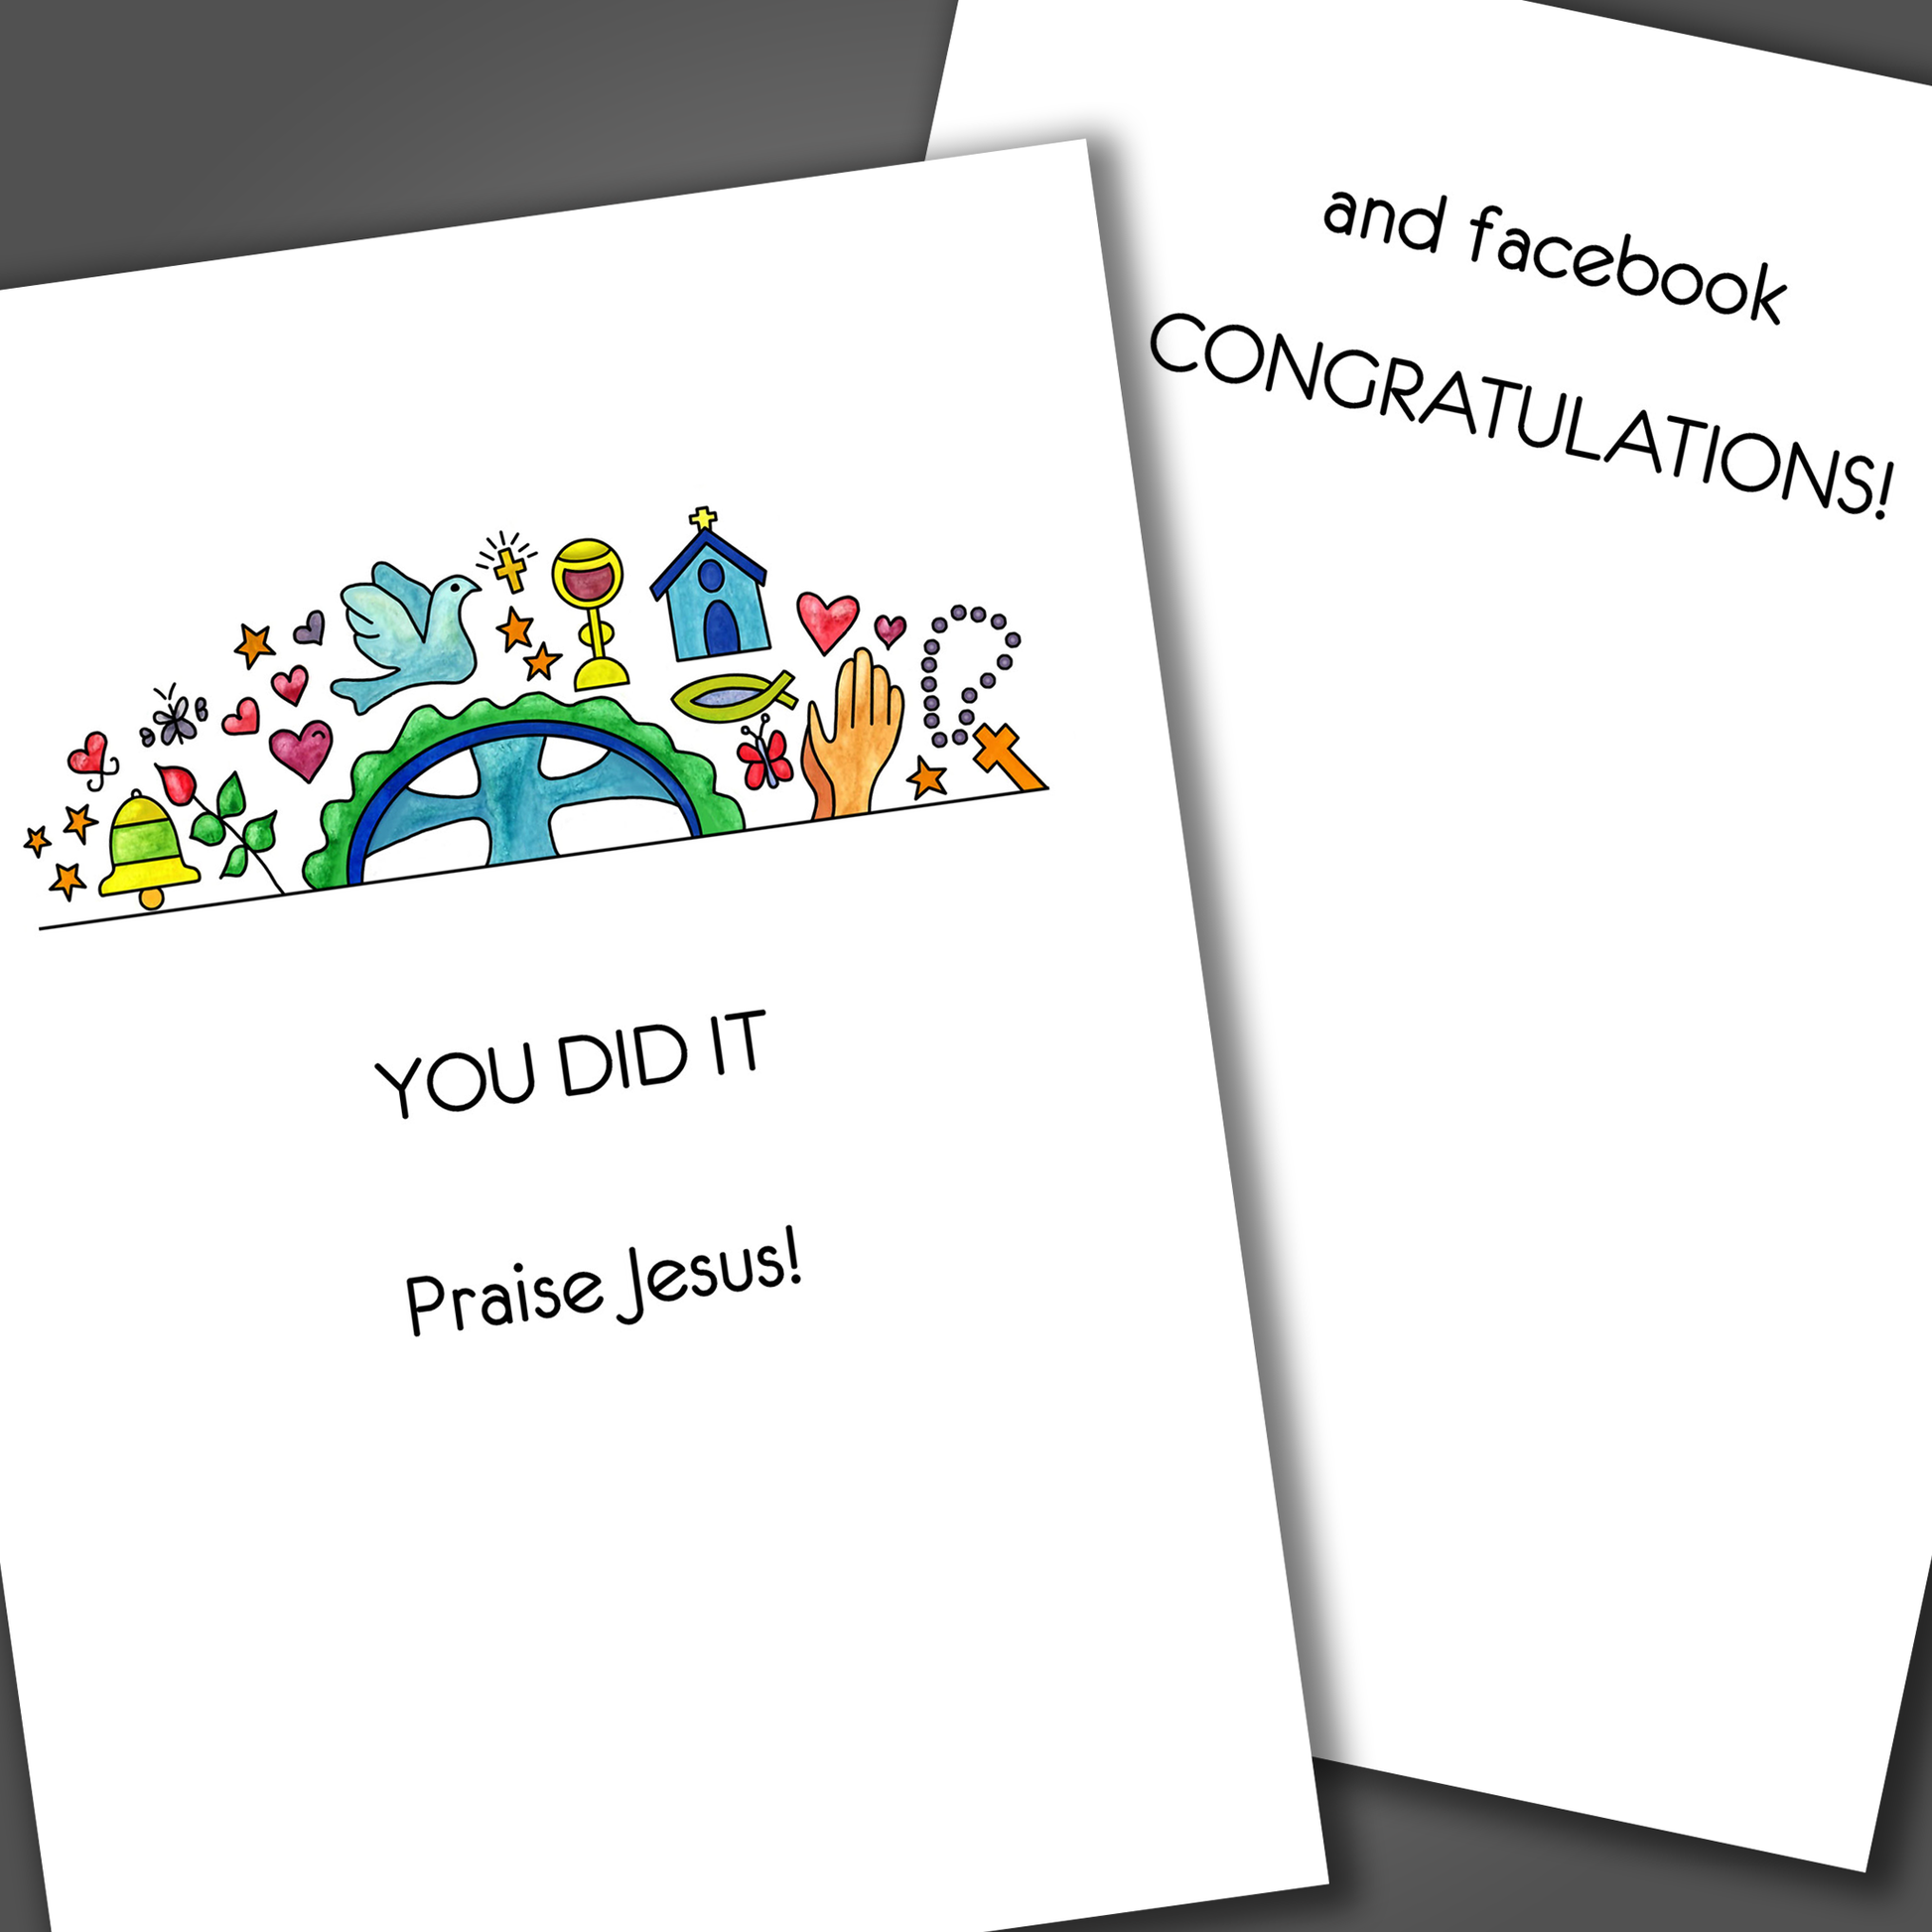 Congratulations card with drawings of religious objects on the and praise Jesus written on front of the card. Inside the card is a funny joke that end with the words and Facebook!